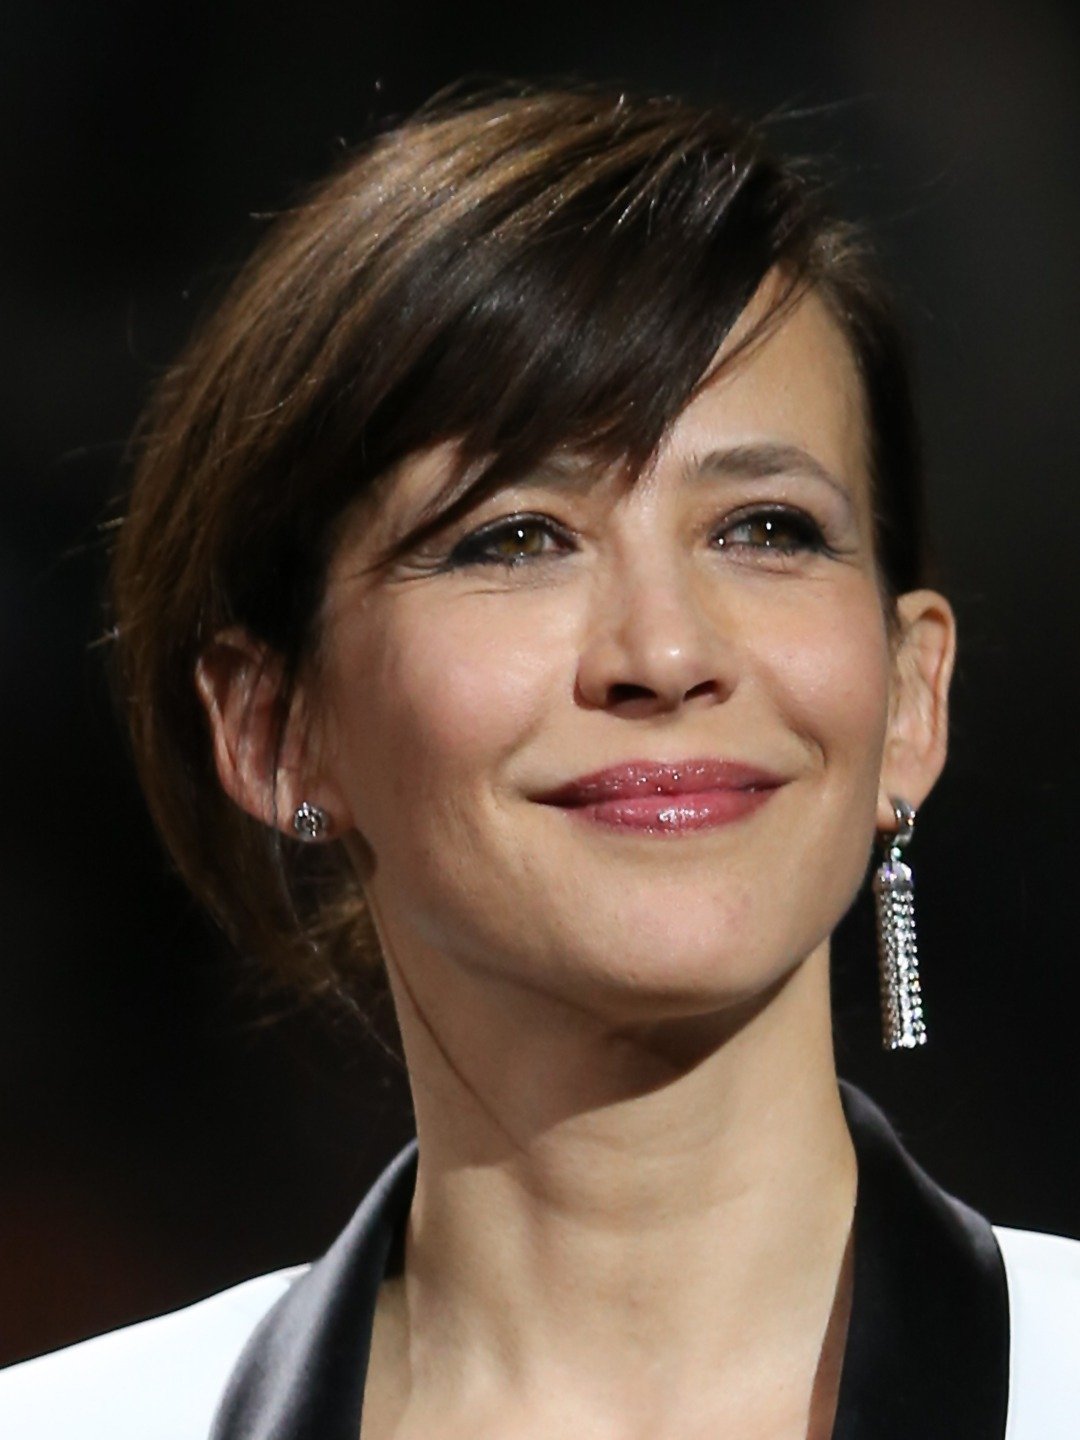 How tall is Sophie Marceau?